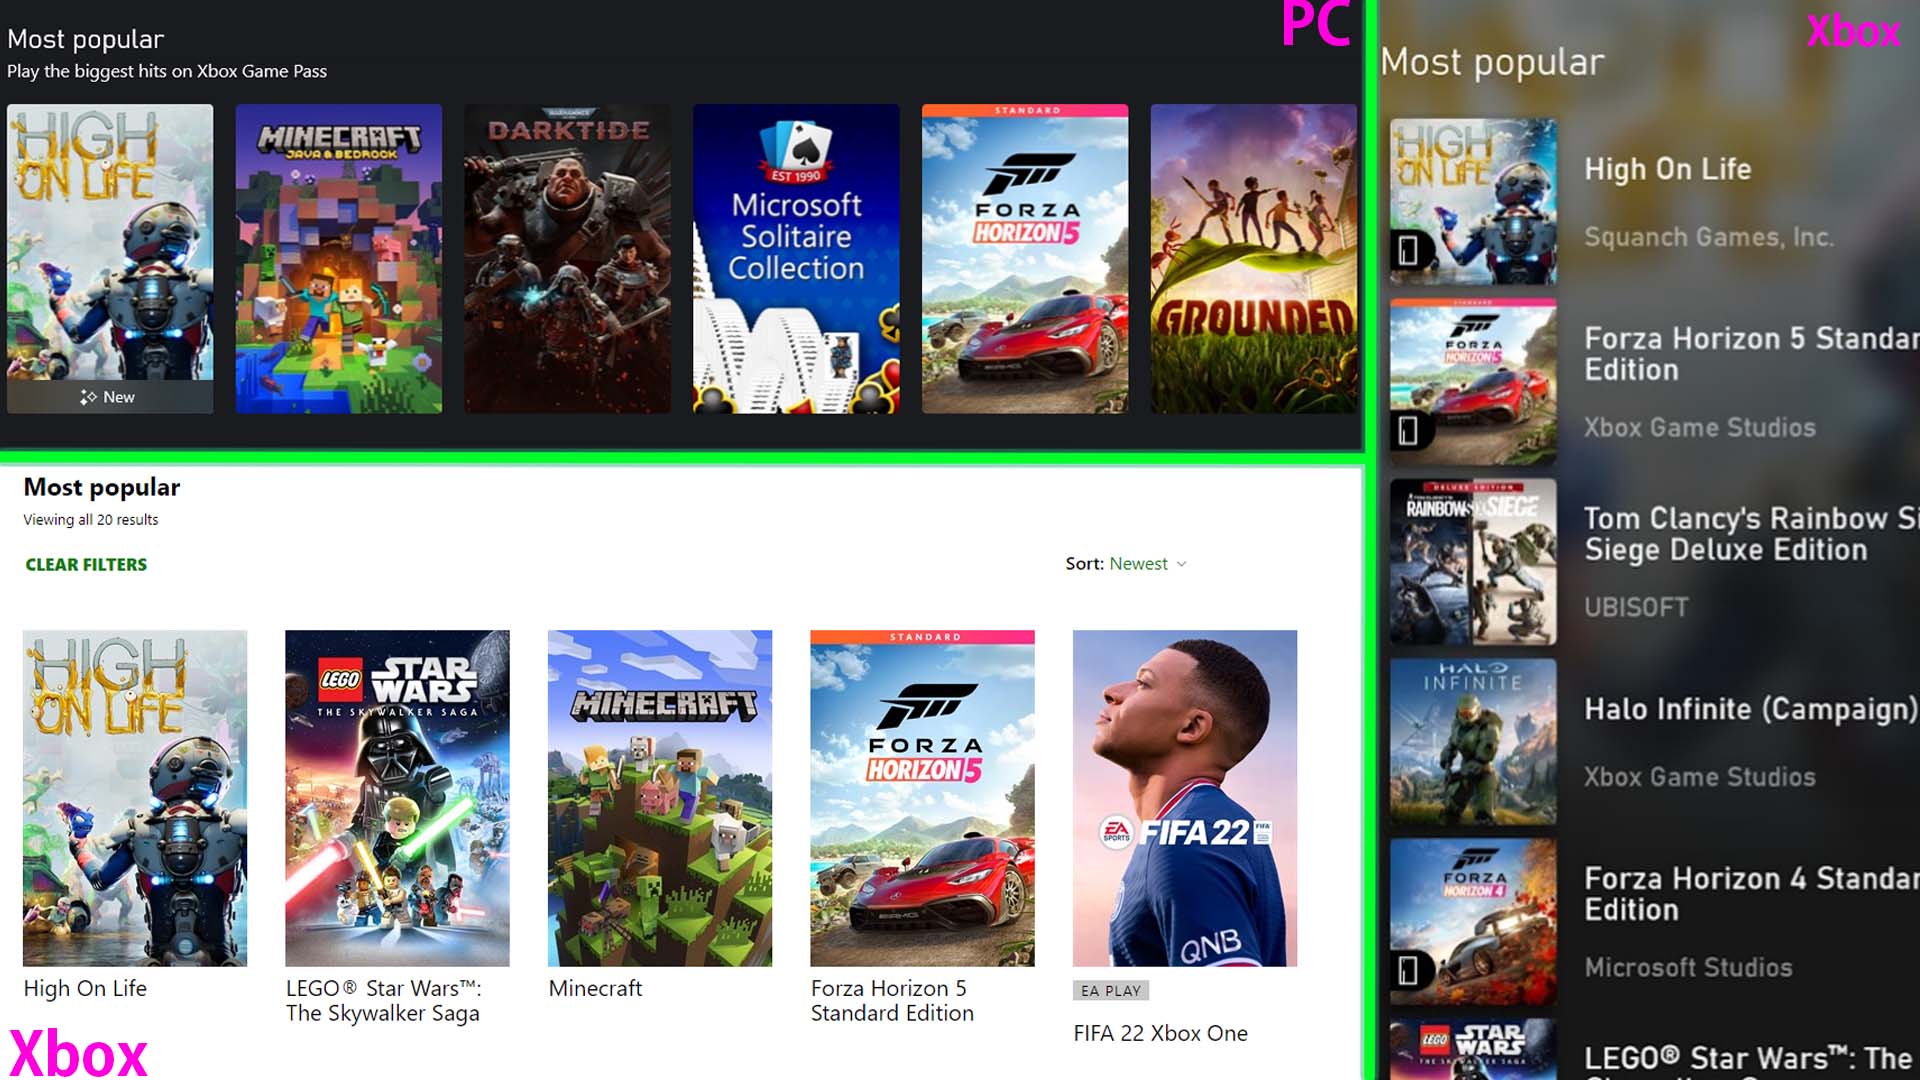 High on Life is now more popular than Minecraft on Xbox Game Pass - Video  Games on Sports Illustrated